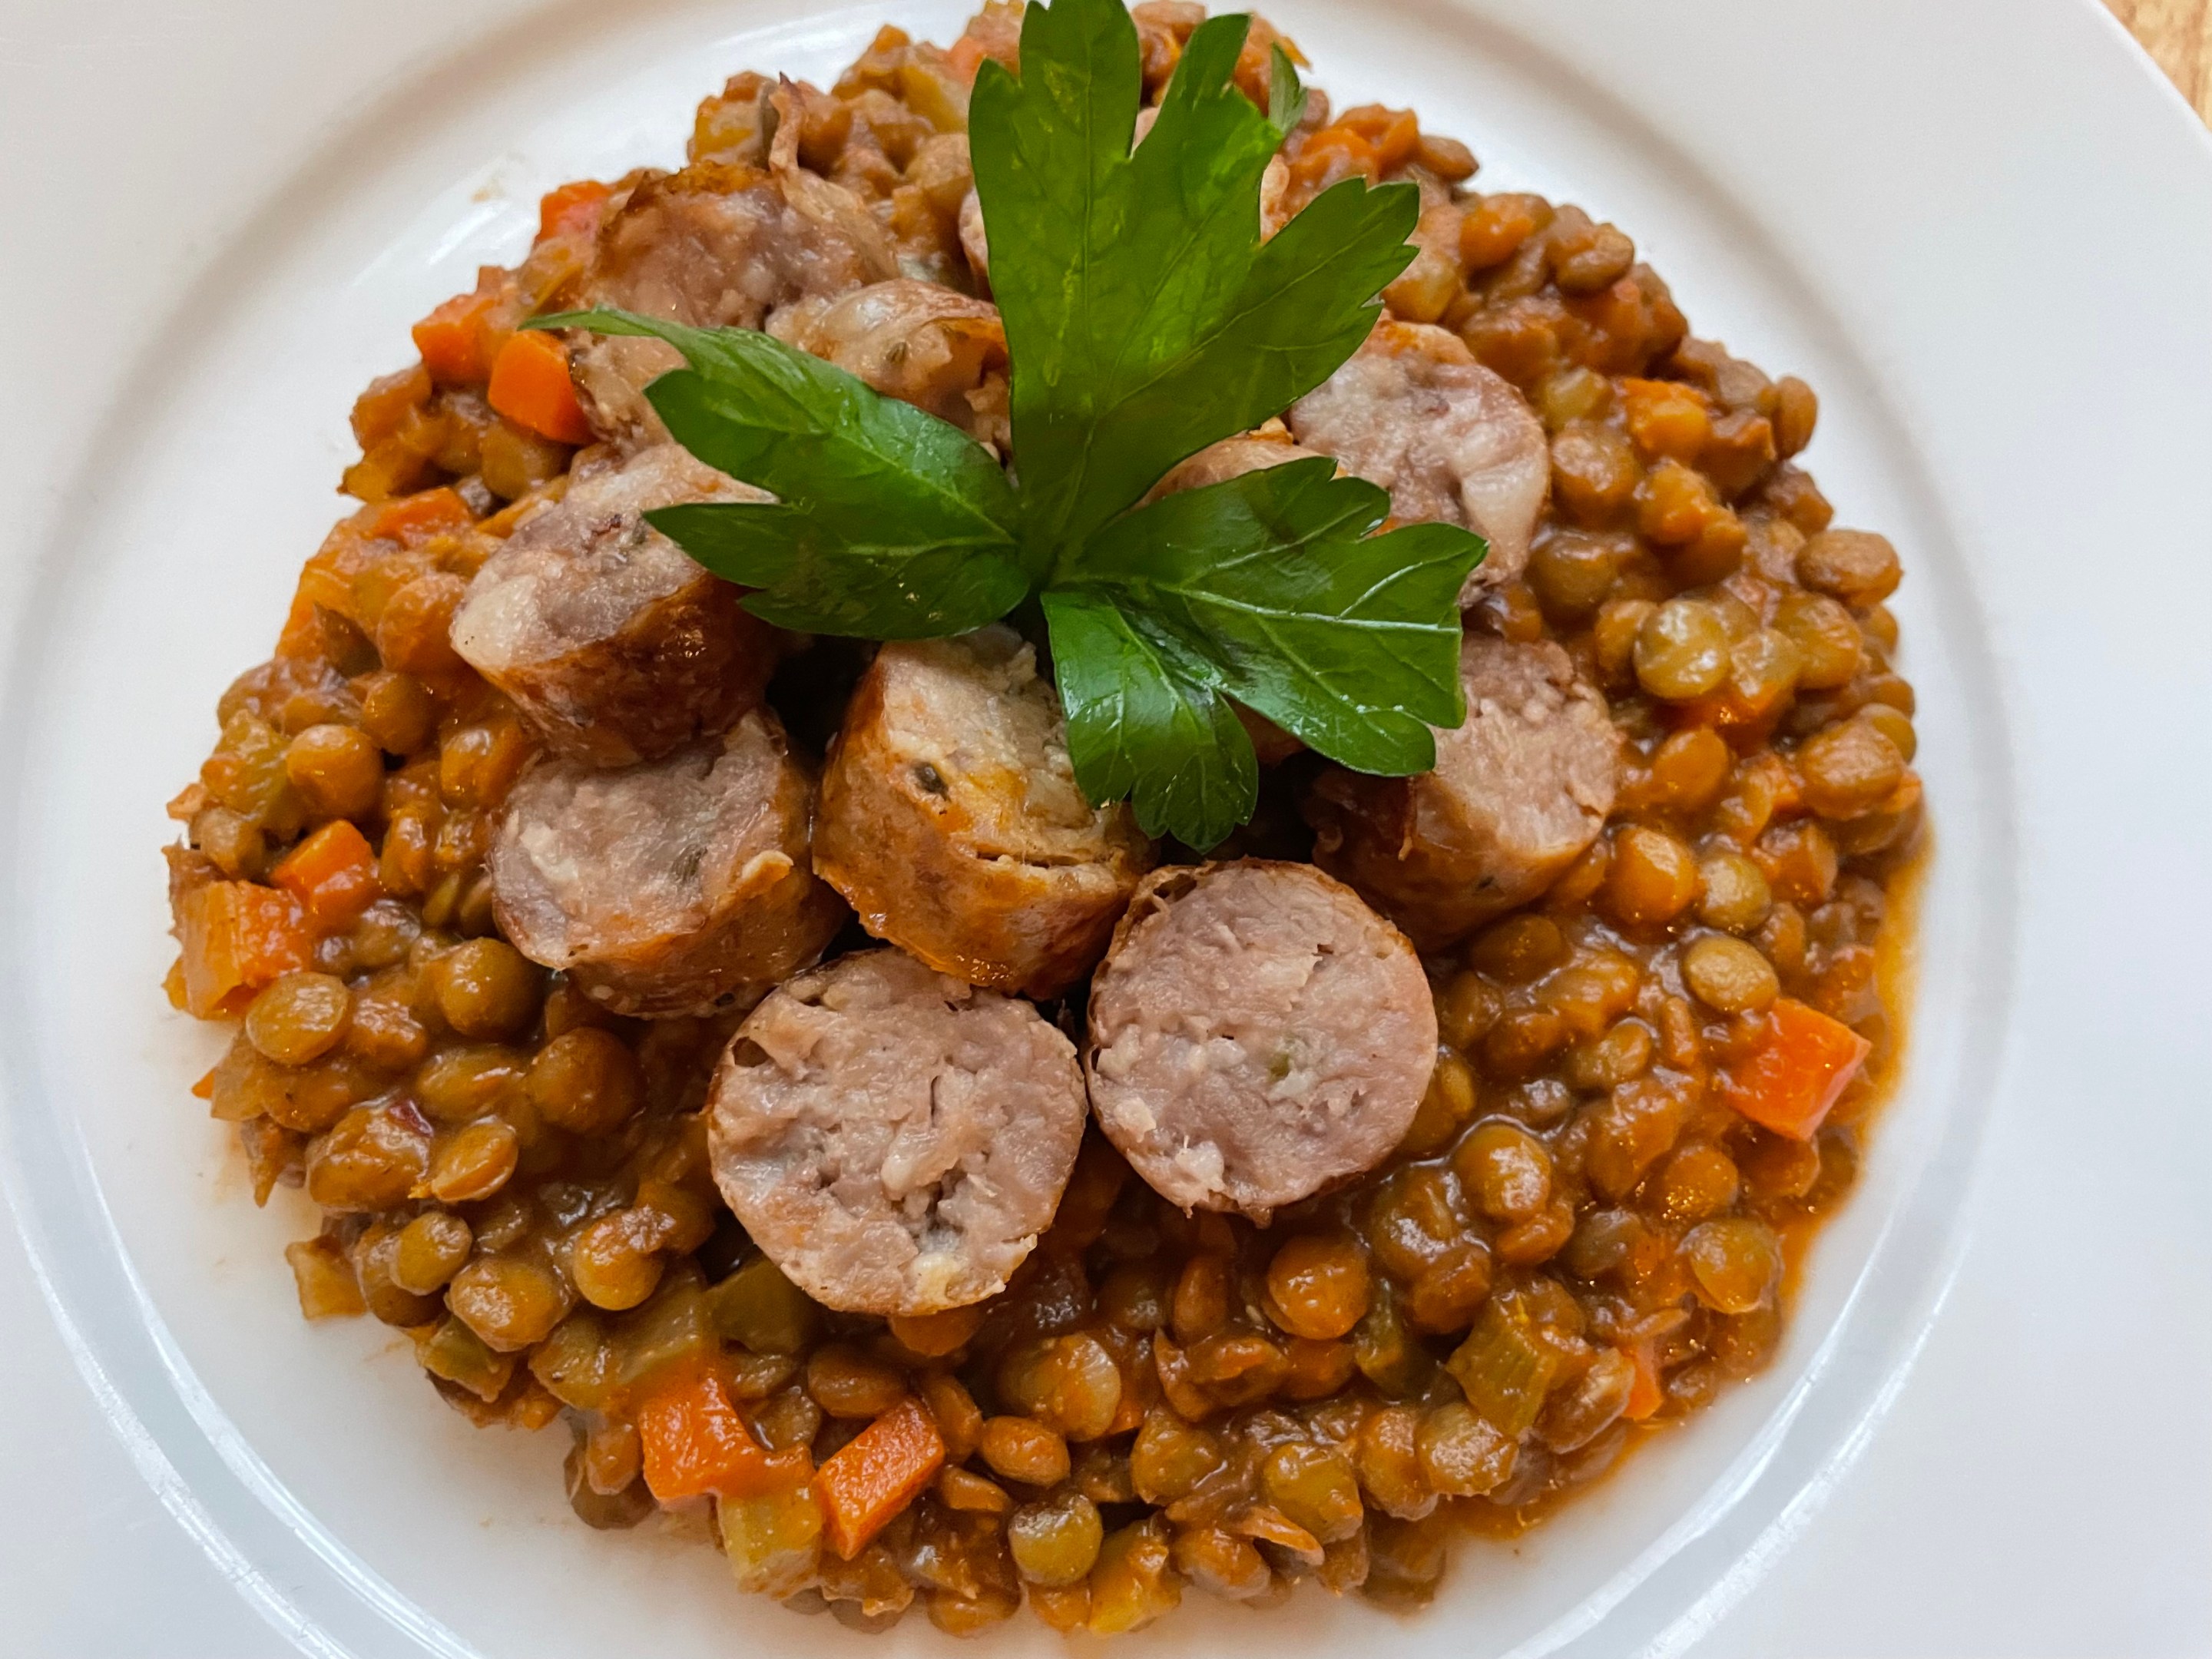 Lentils with sausage.